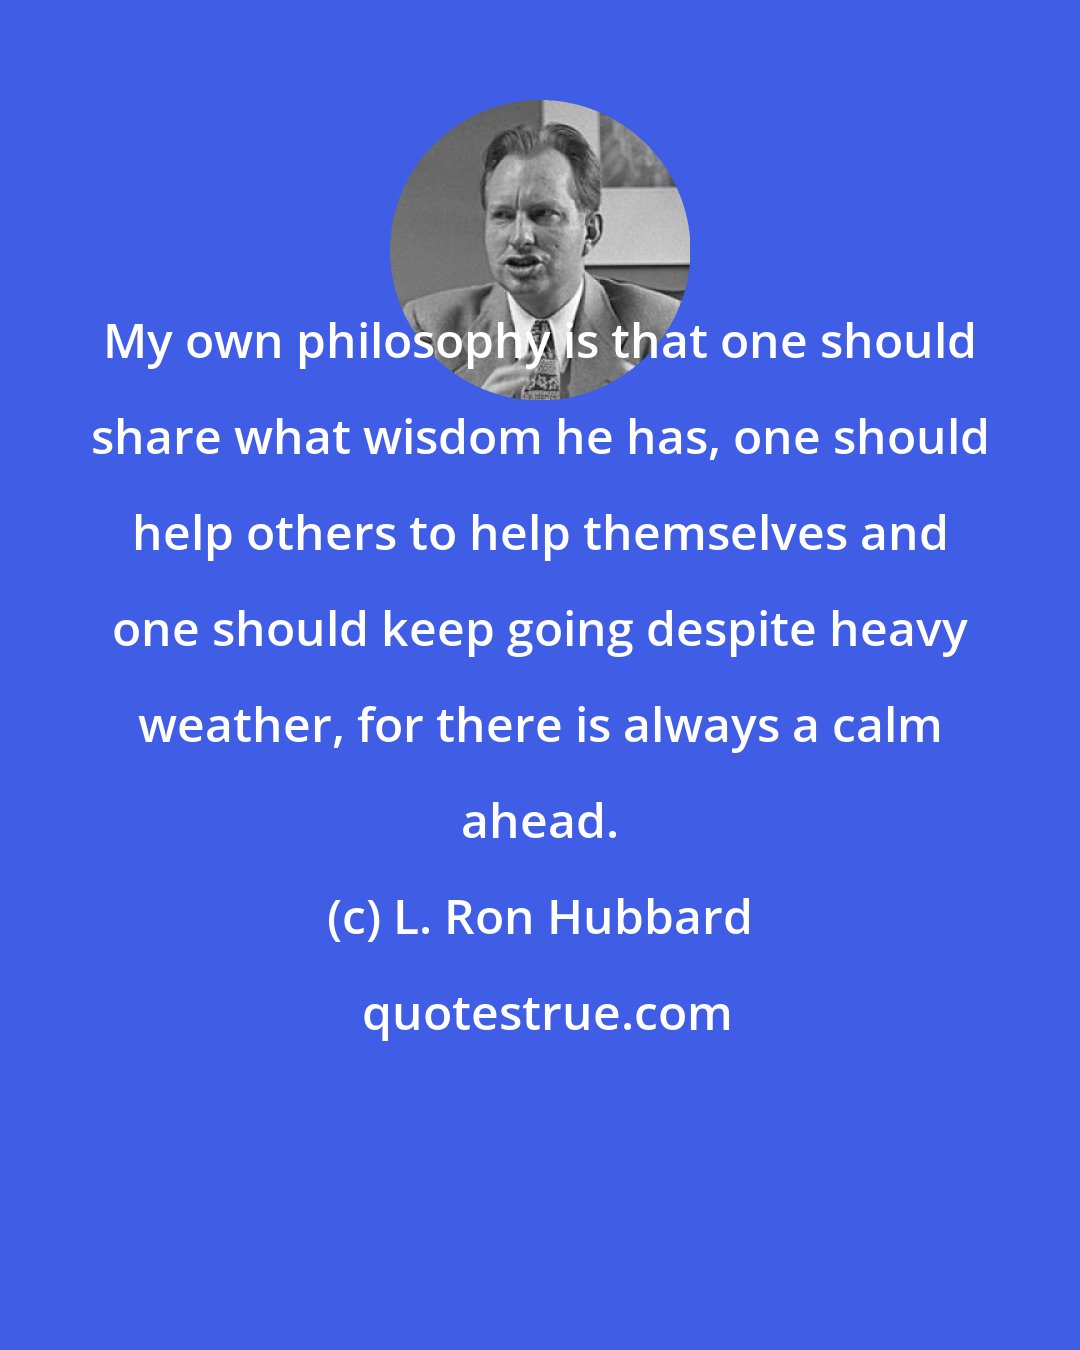 L. Ron Hubbard: My own philosophy is that one should share what wisdom he has, one should help others to help themselves and one should keep going despite heavy weather, for there is always a calm ahead.